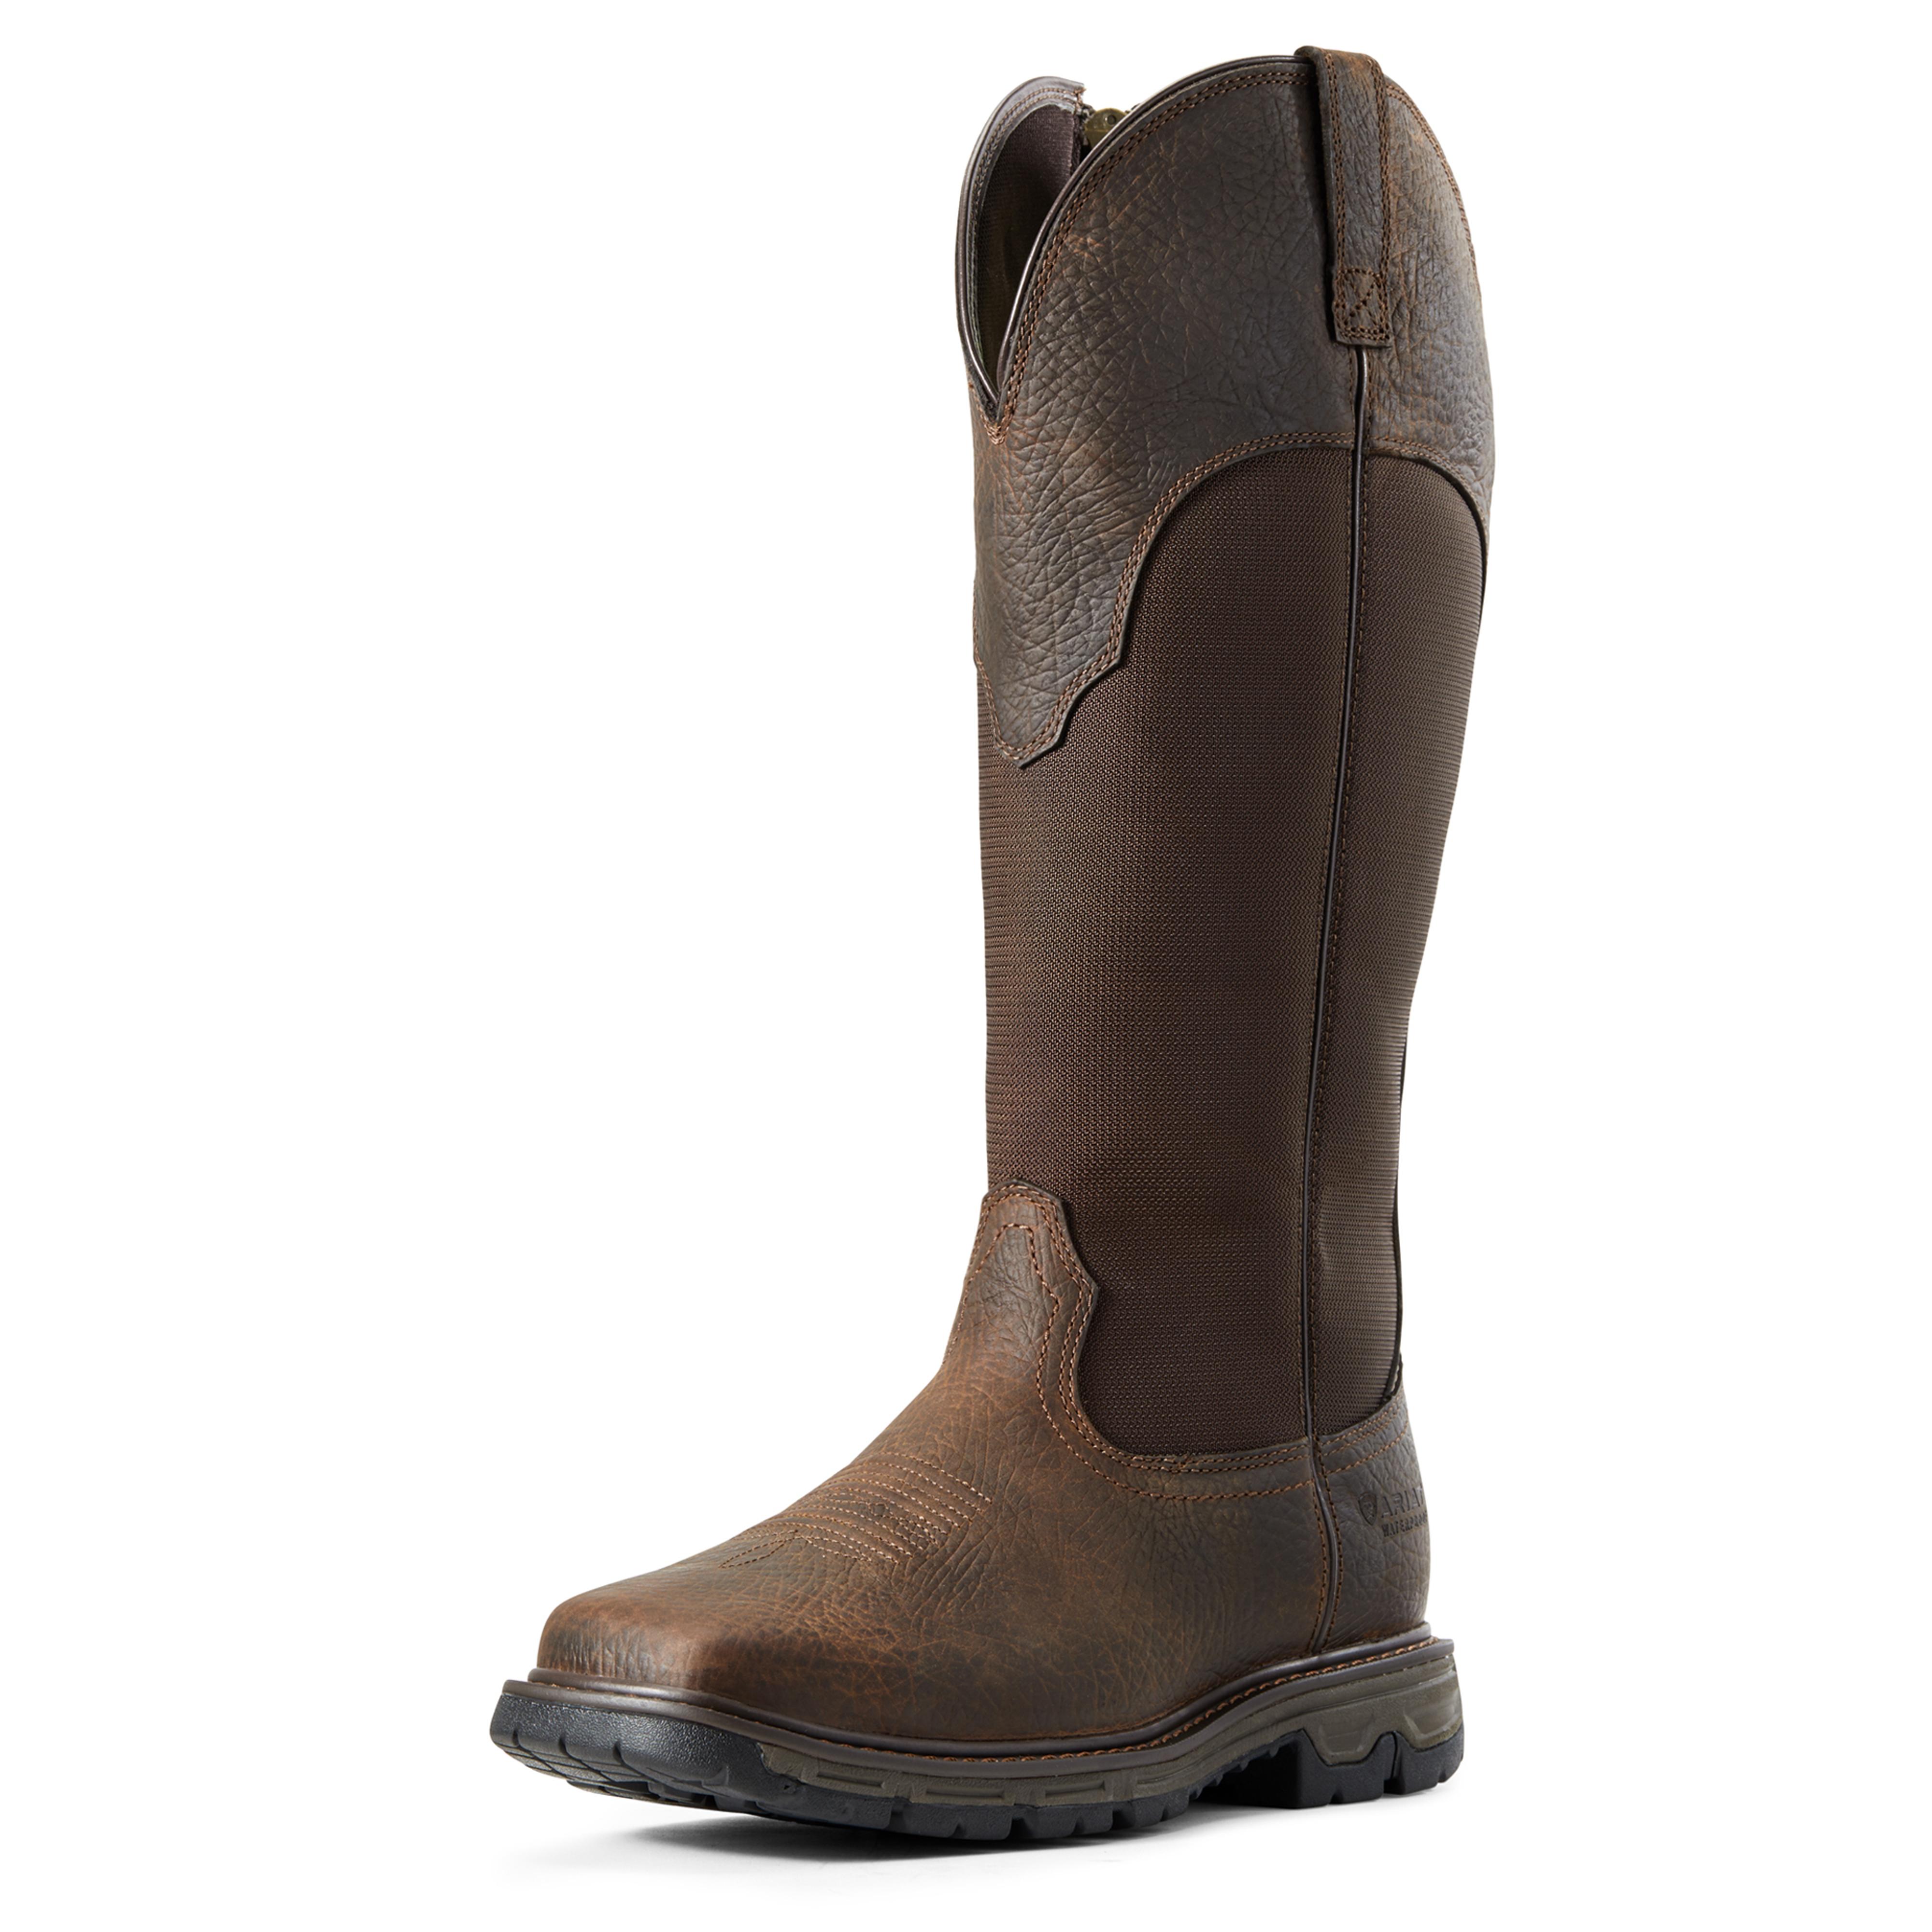  Conquest Snakeboot H2o